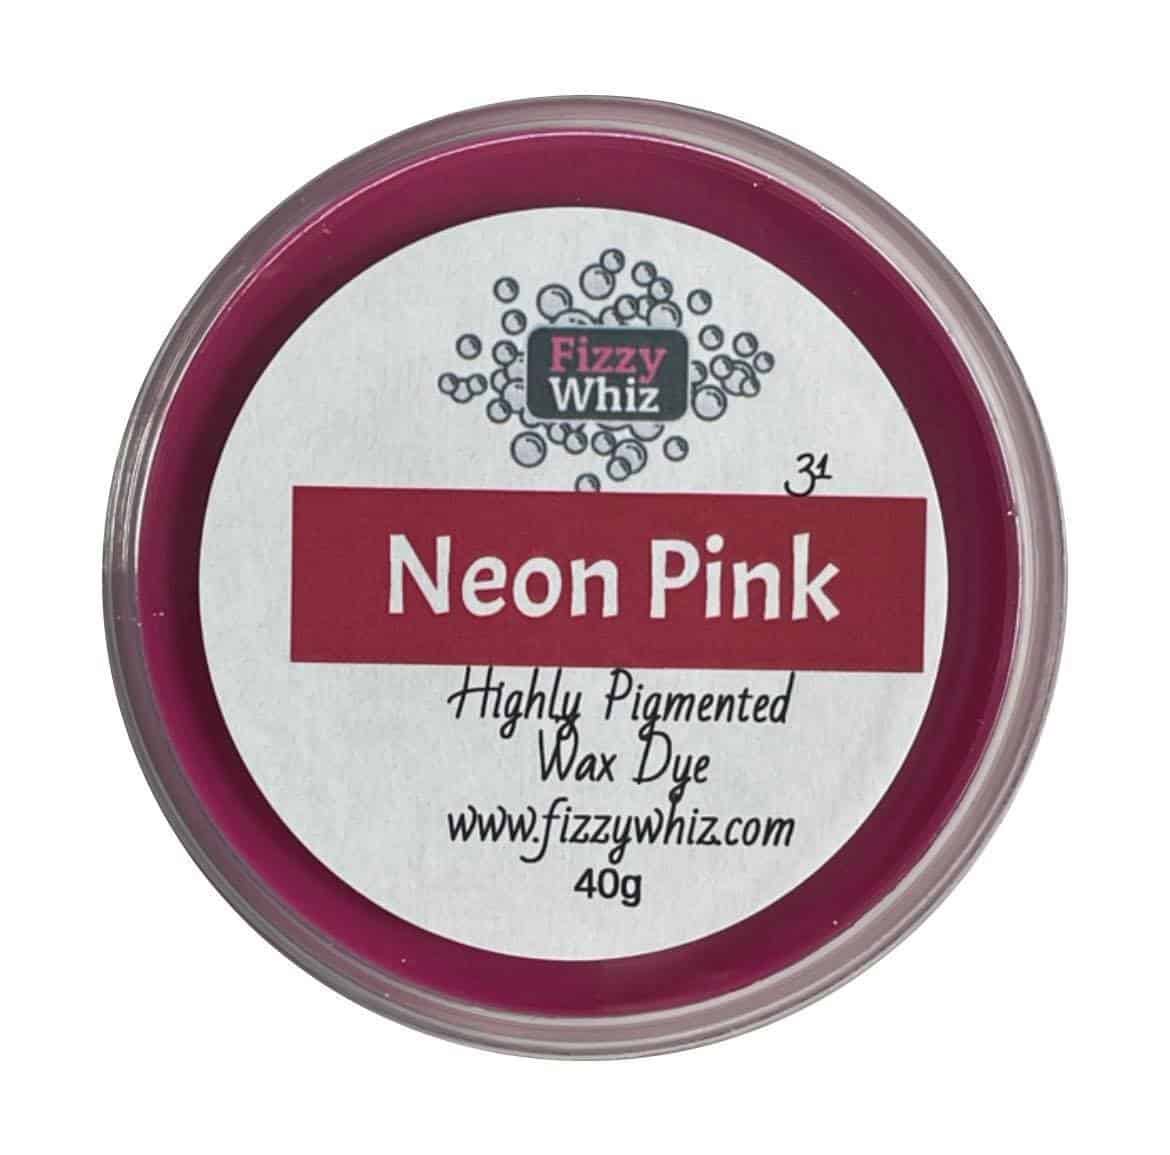 Neon Pink Fluorescent Dye, Cosmetic Safe, Candles, Wax Melts